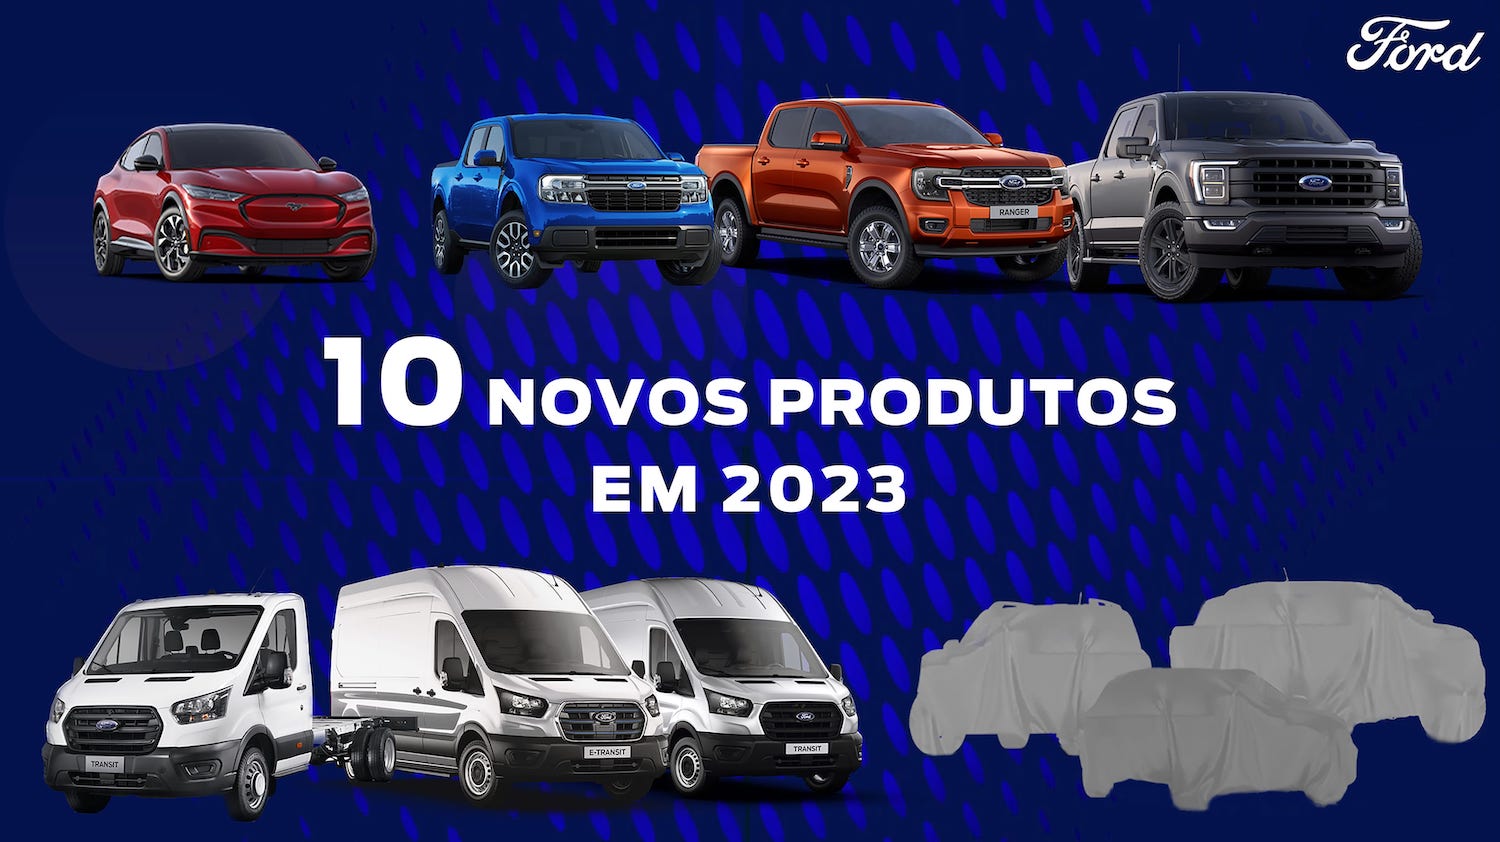 Ford Brazil To Go On Product Offensive In 2023